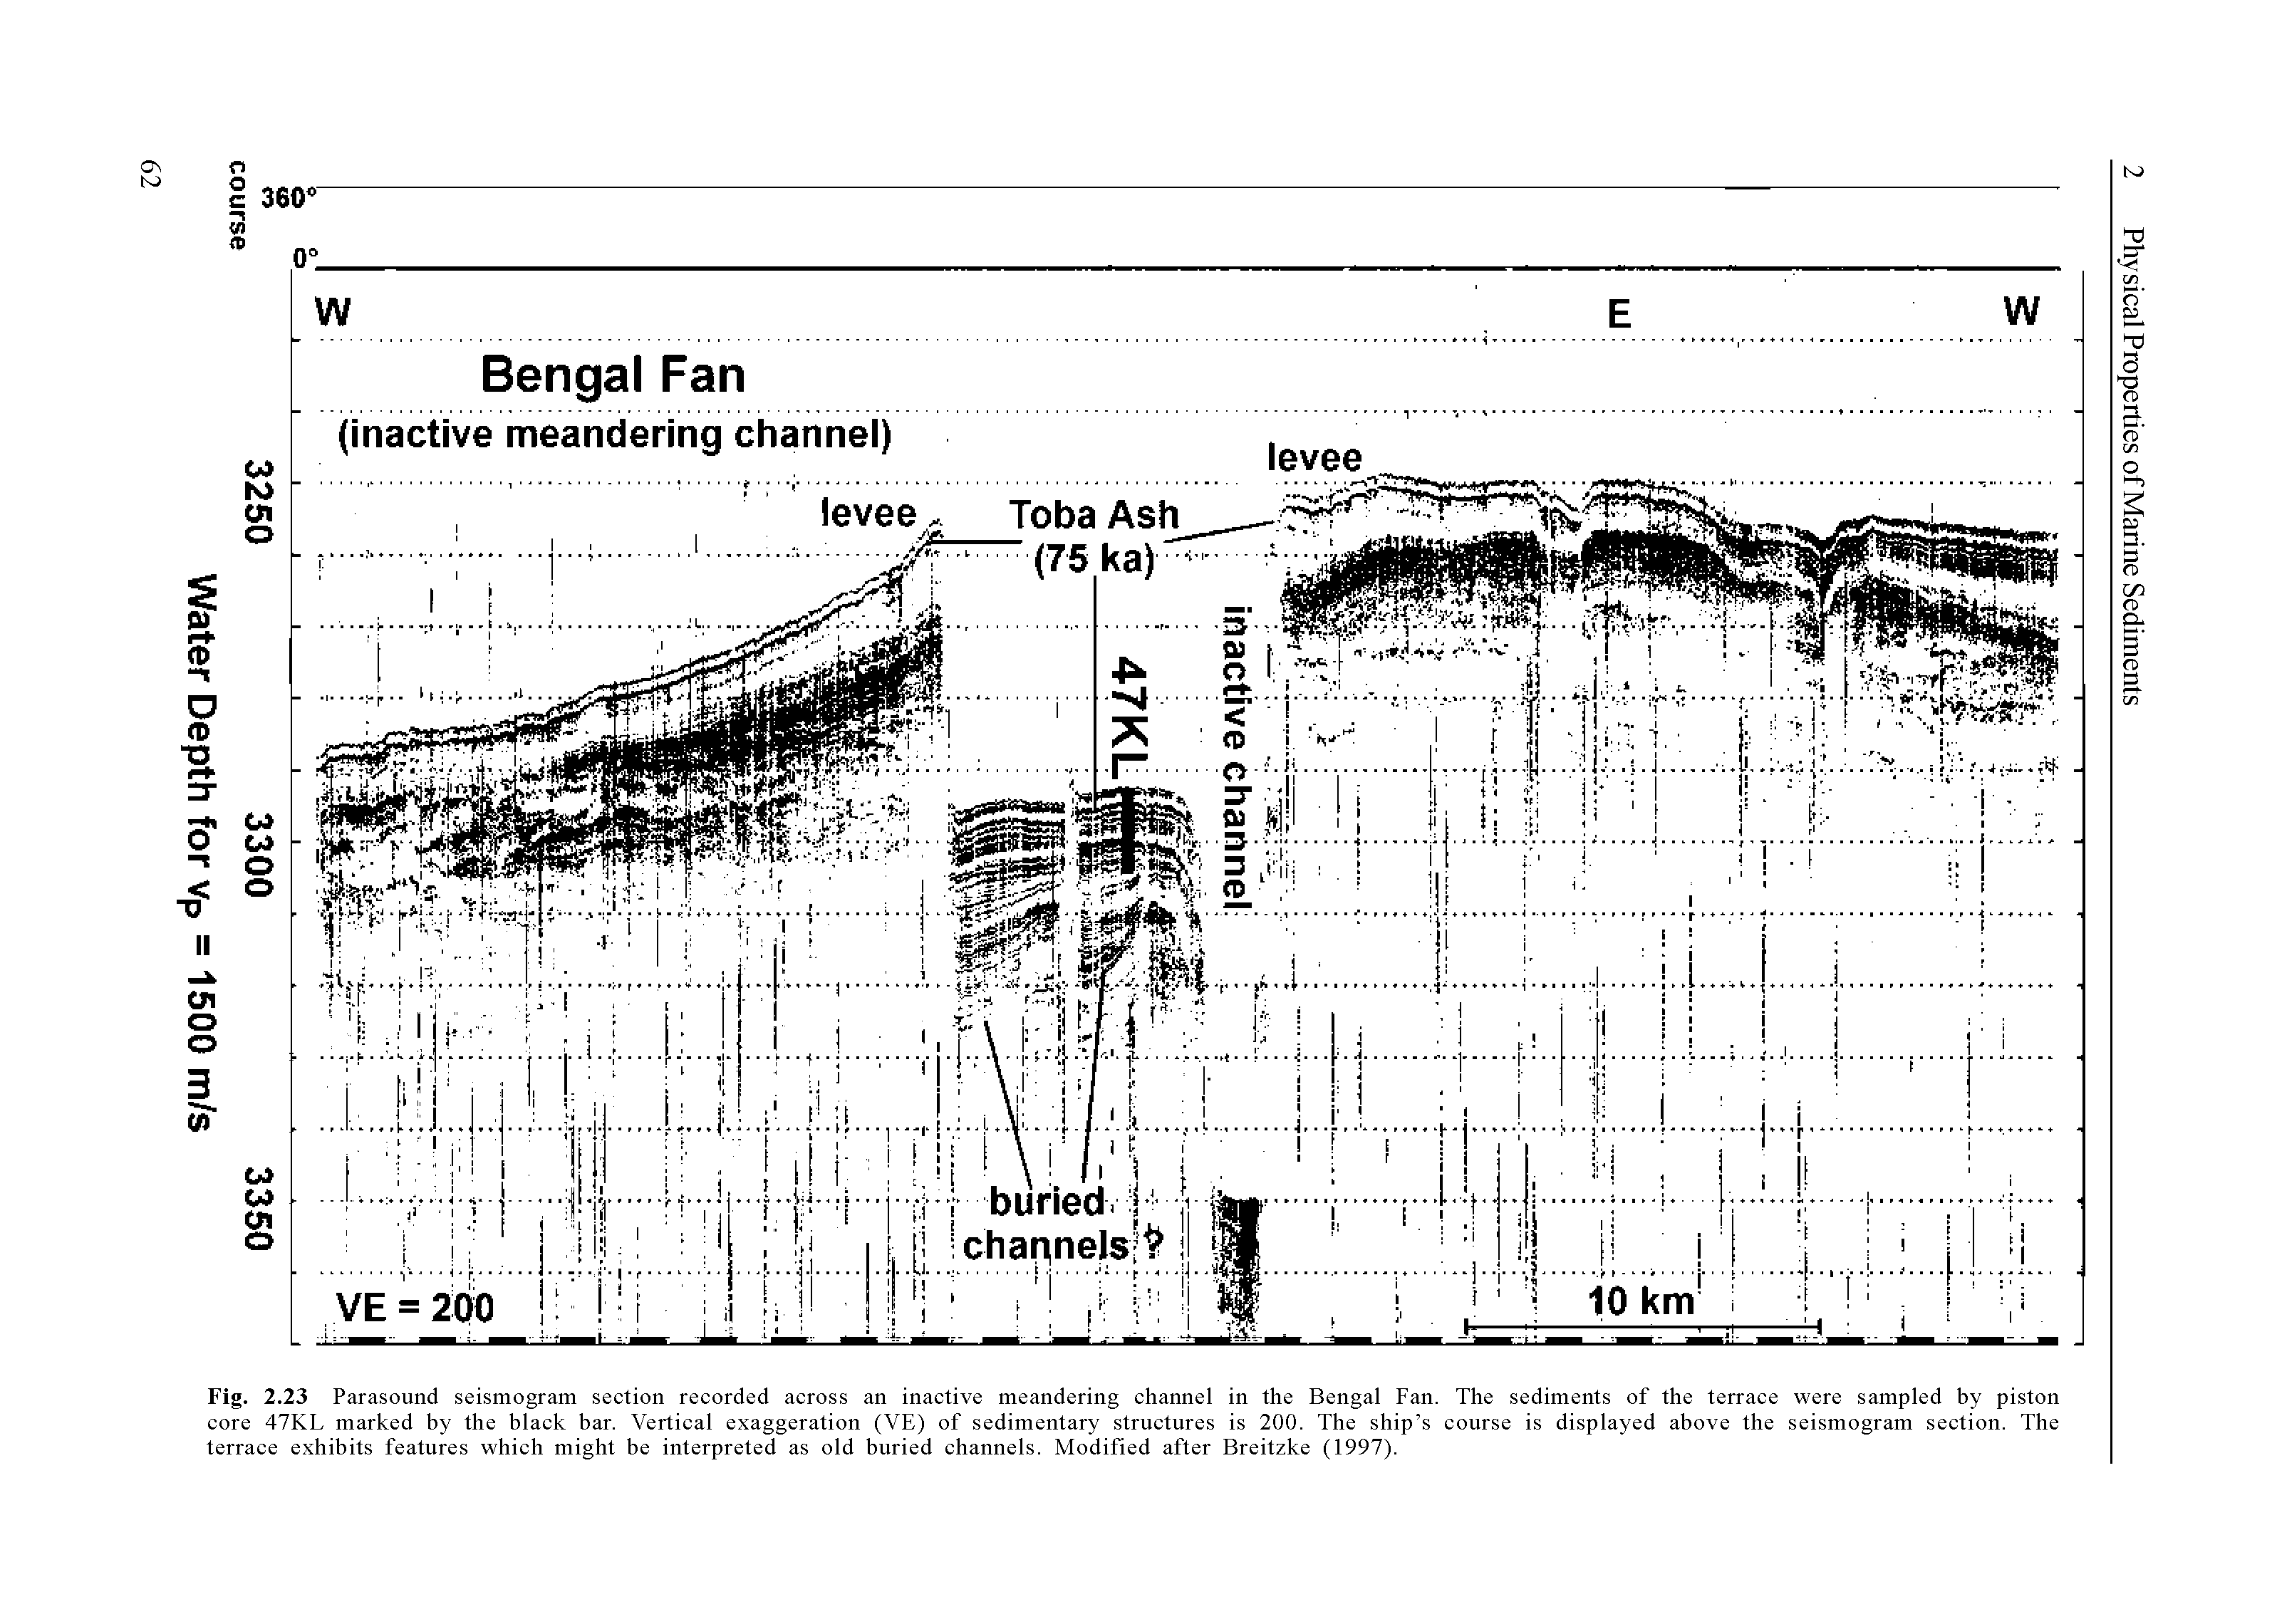 Fig. 2.23 Parasound seismogram section recorded across an inactive meandering channel in the Bengal Fan. The sediments of the terrace were sampled by piston core 47KL marked by the black bar. Vertical exaggeration (VE) of sedimentary structures is 200. The ship s course is displayed above the seismogram section. The terrace exhibits features which might be interpreted as old buried channels. Modified after Breitzke (1997).